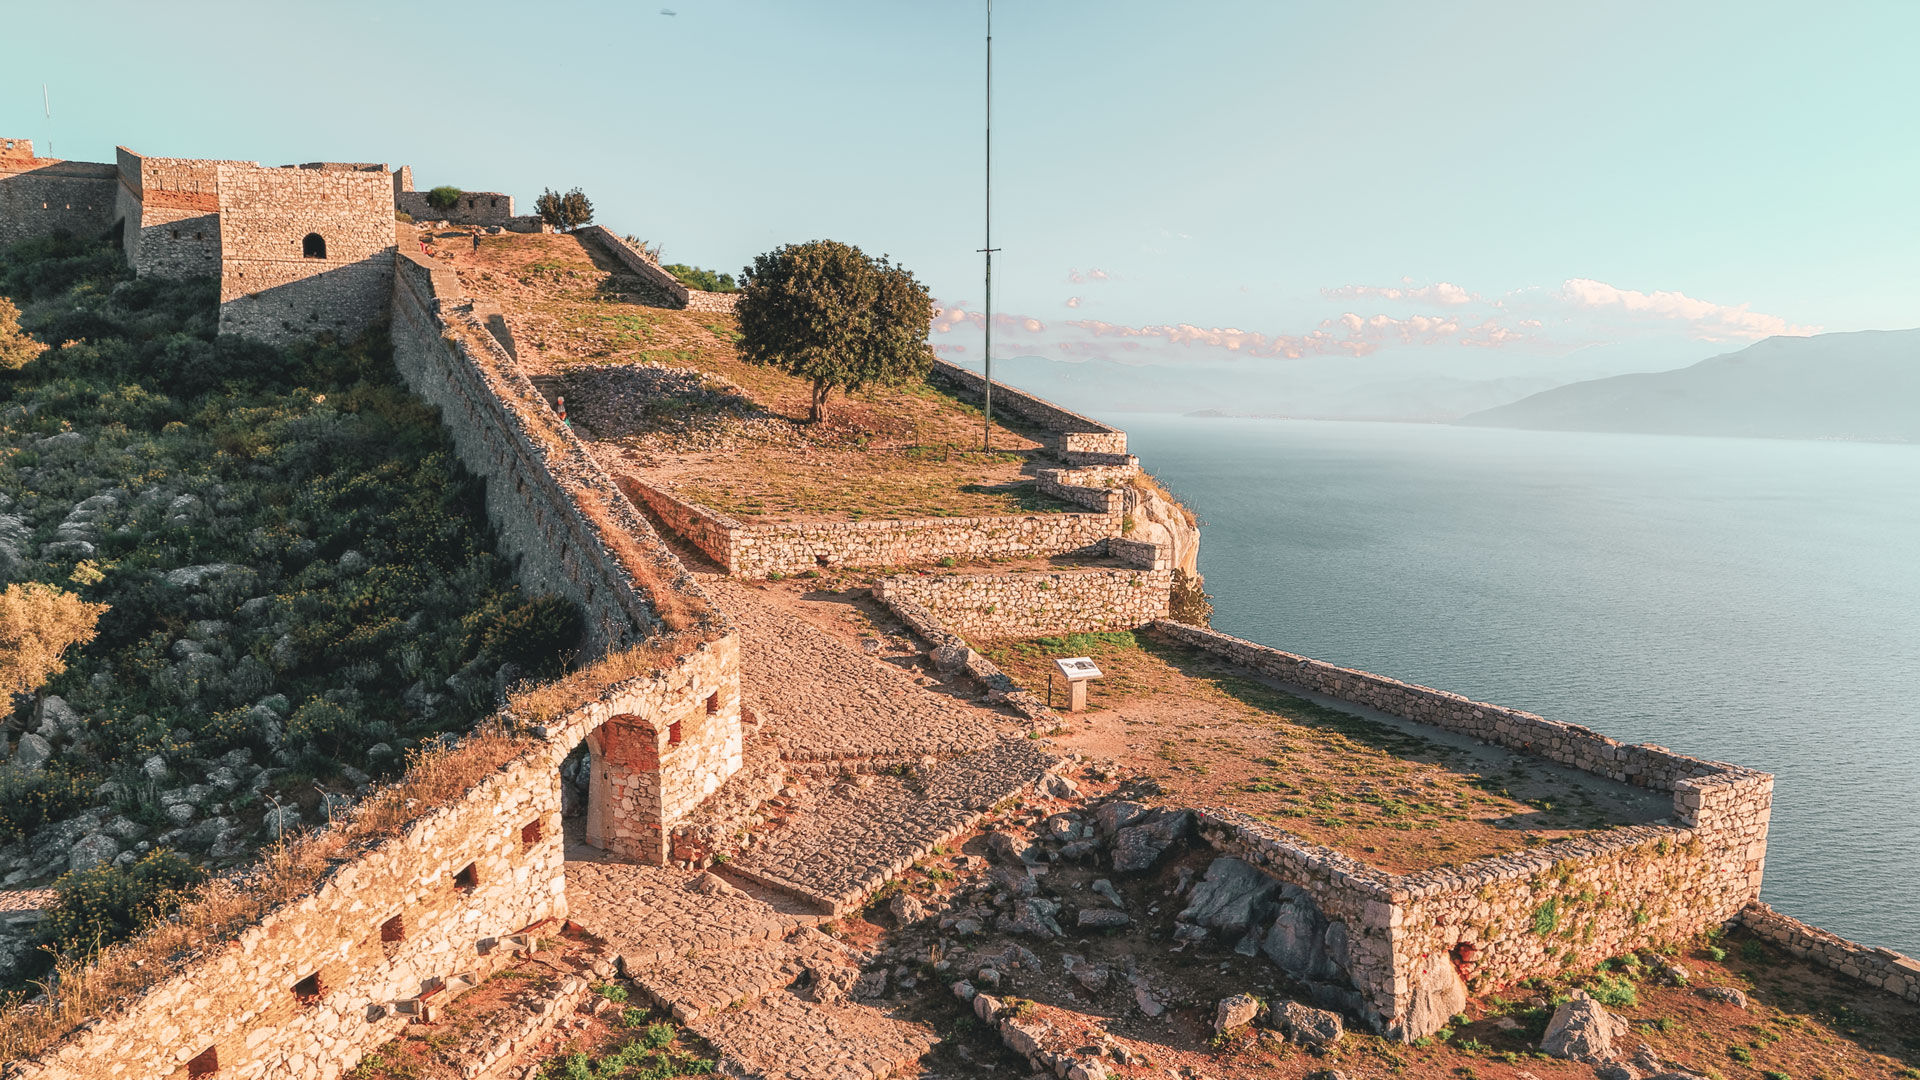 The Venetians’ grand fortification in Nafplio is also a landmark symbol of freedom for Greeks